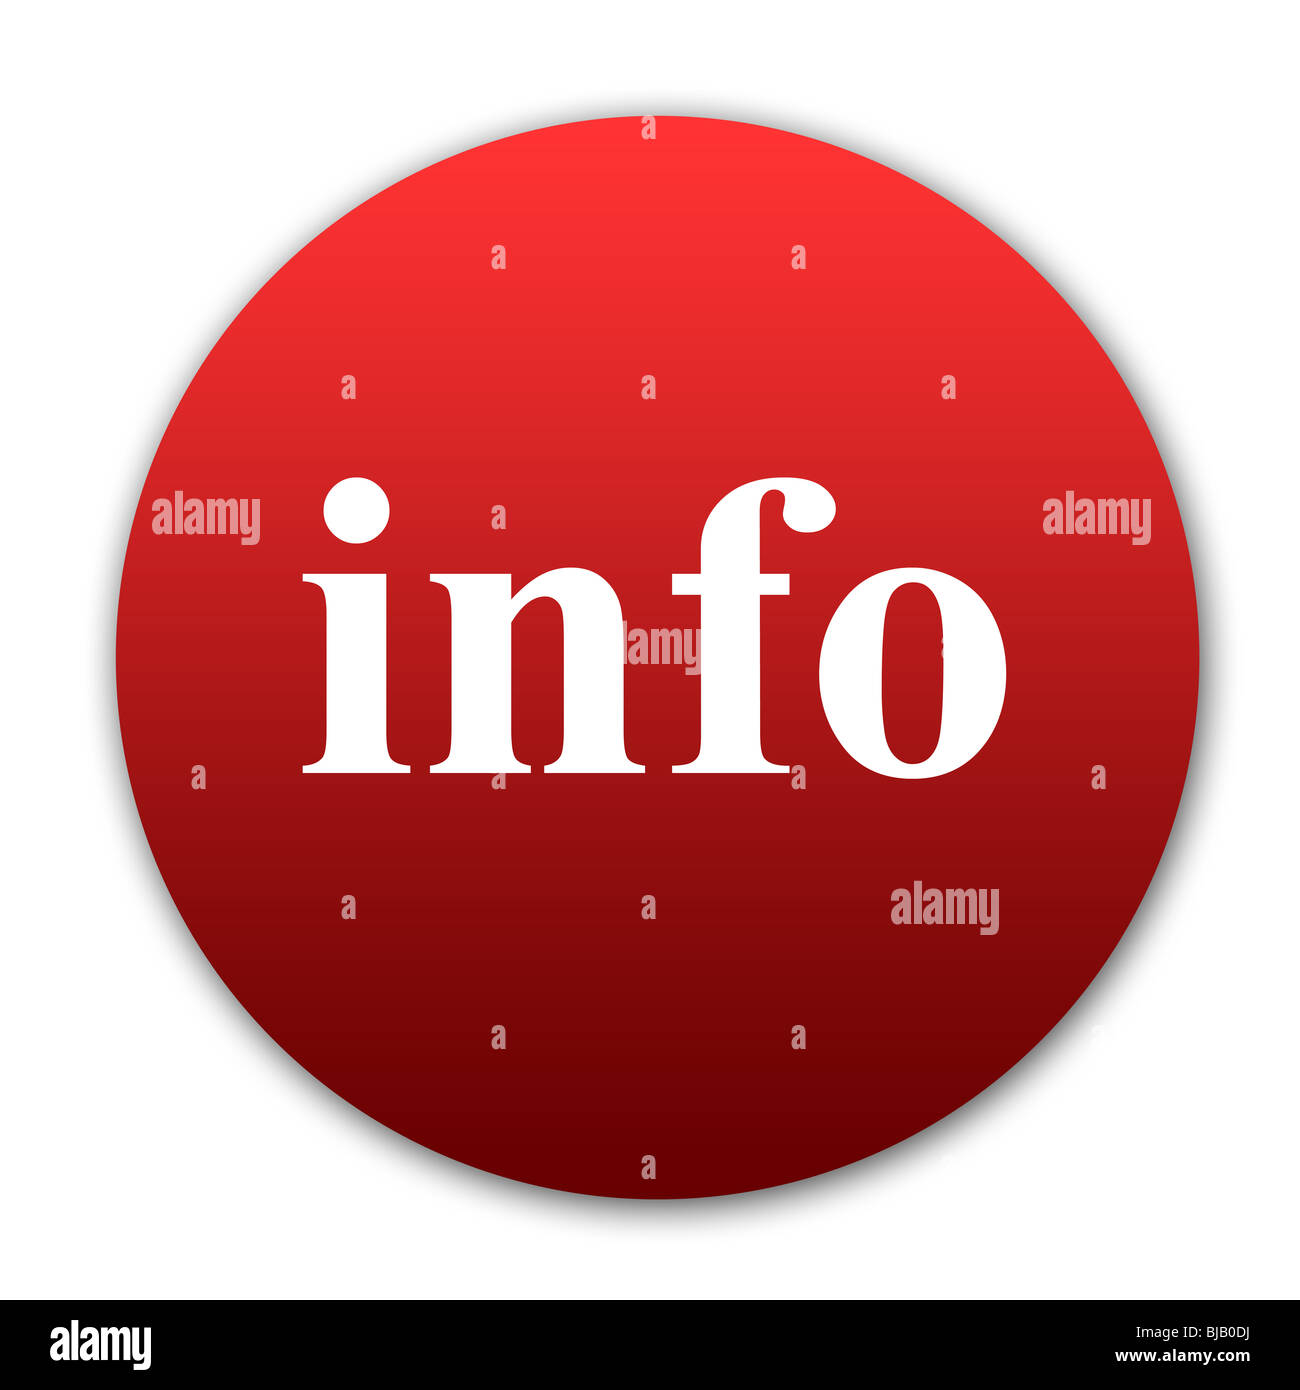 Info button isolated on white background. Stock Photo